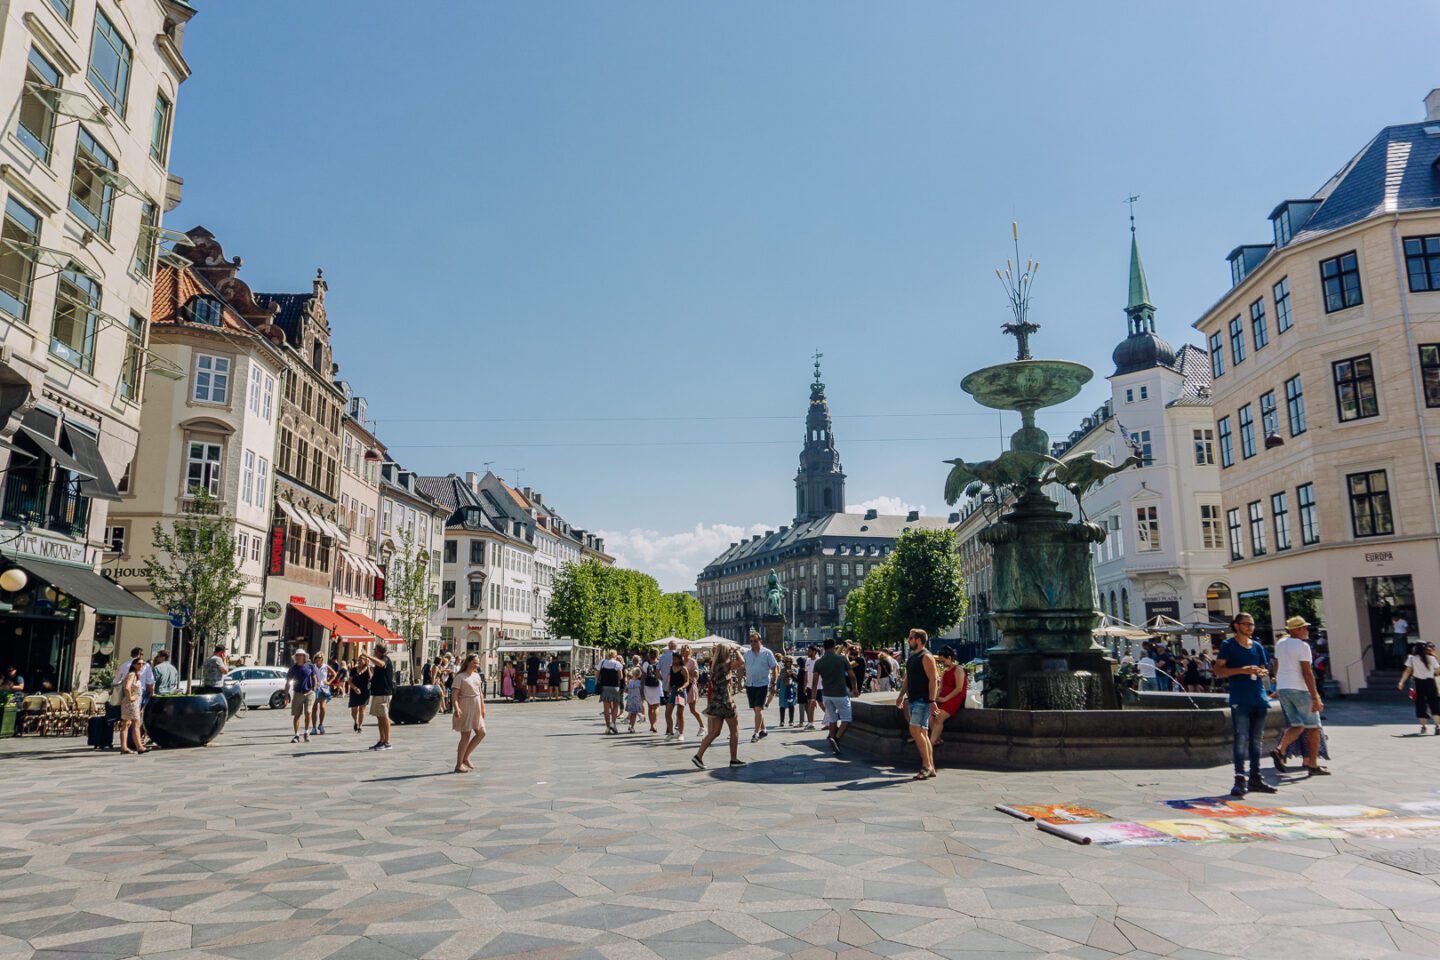 Blue skies on a summer's day and people walking on Strøget, Copenhagen's main shopping street and one of Europe's longest pedestrian streets